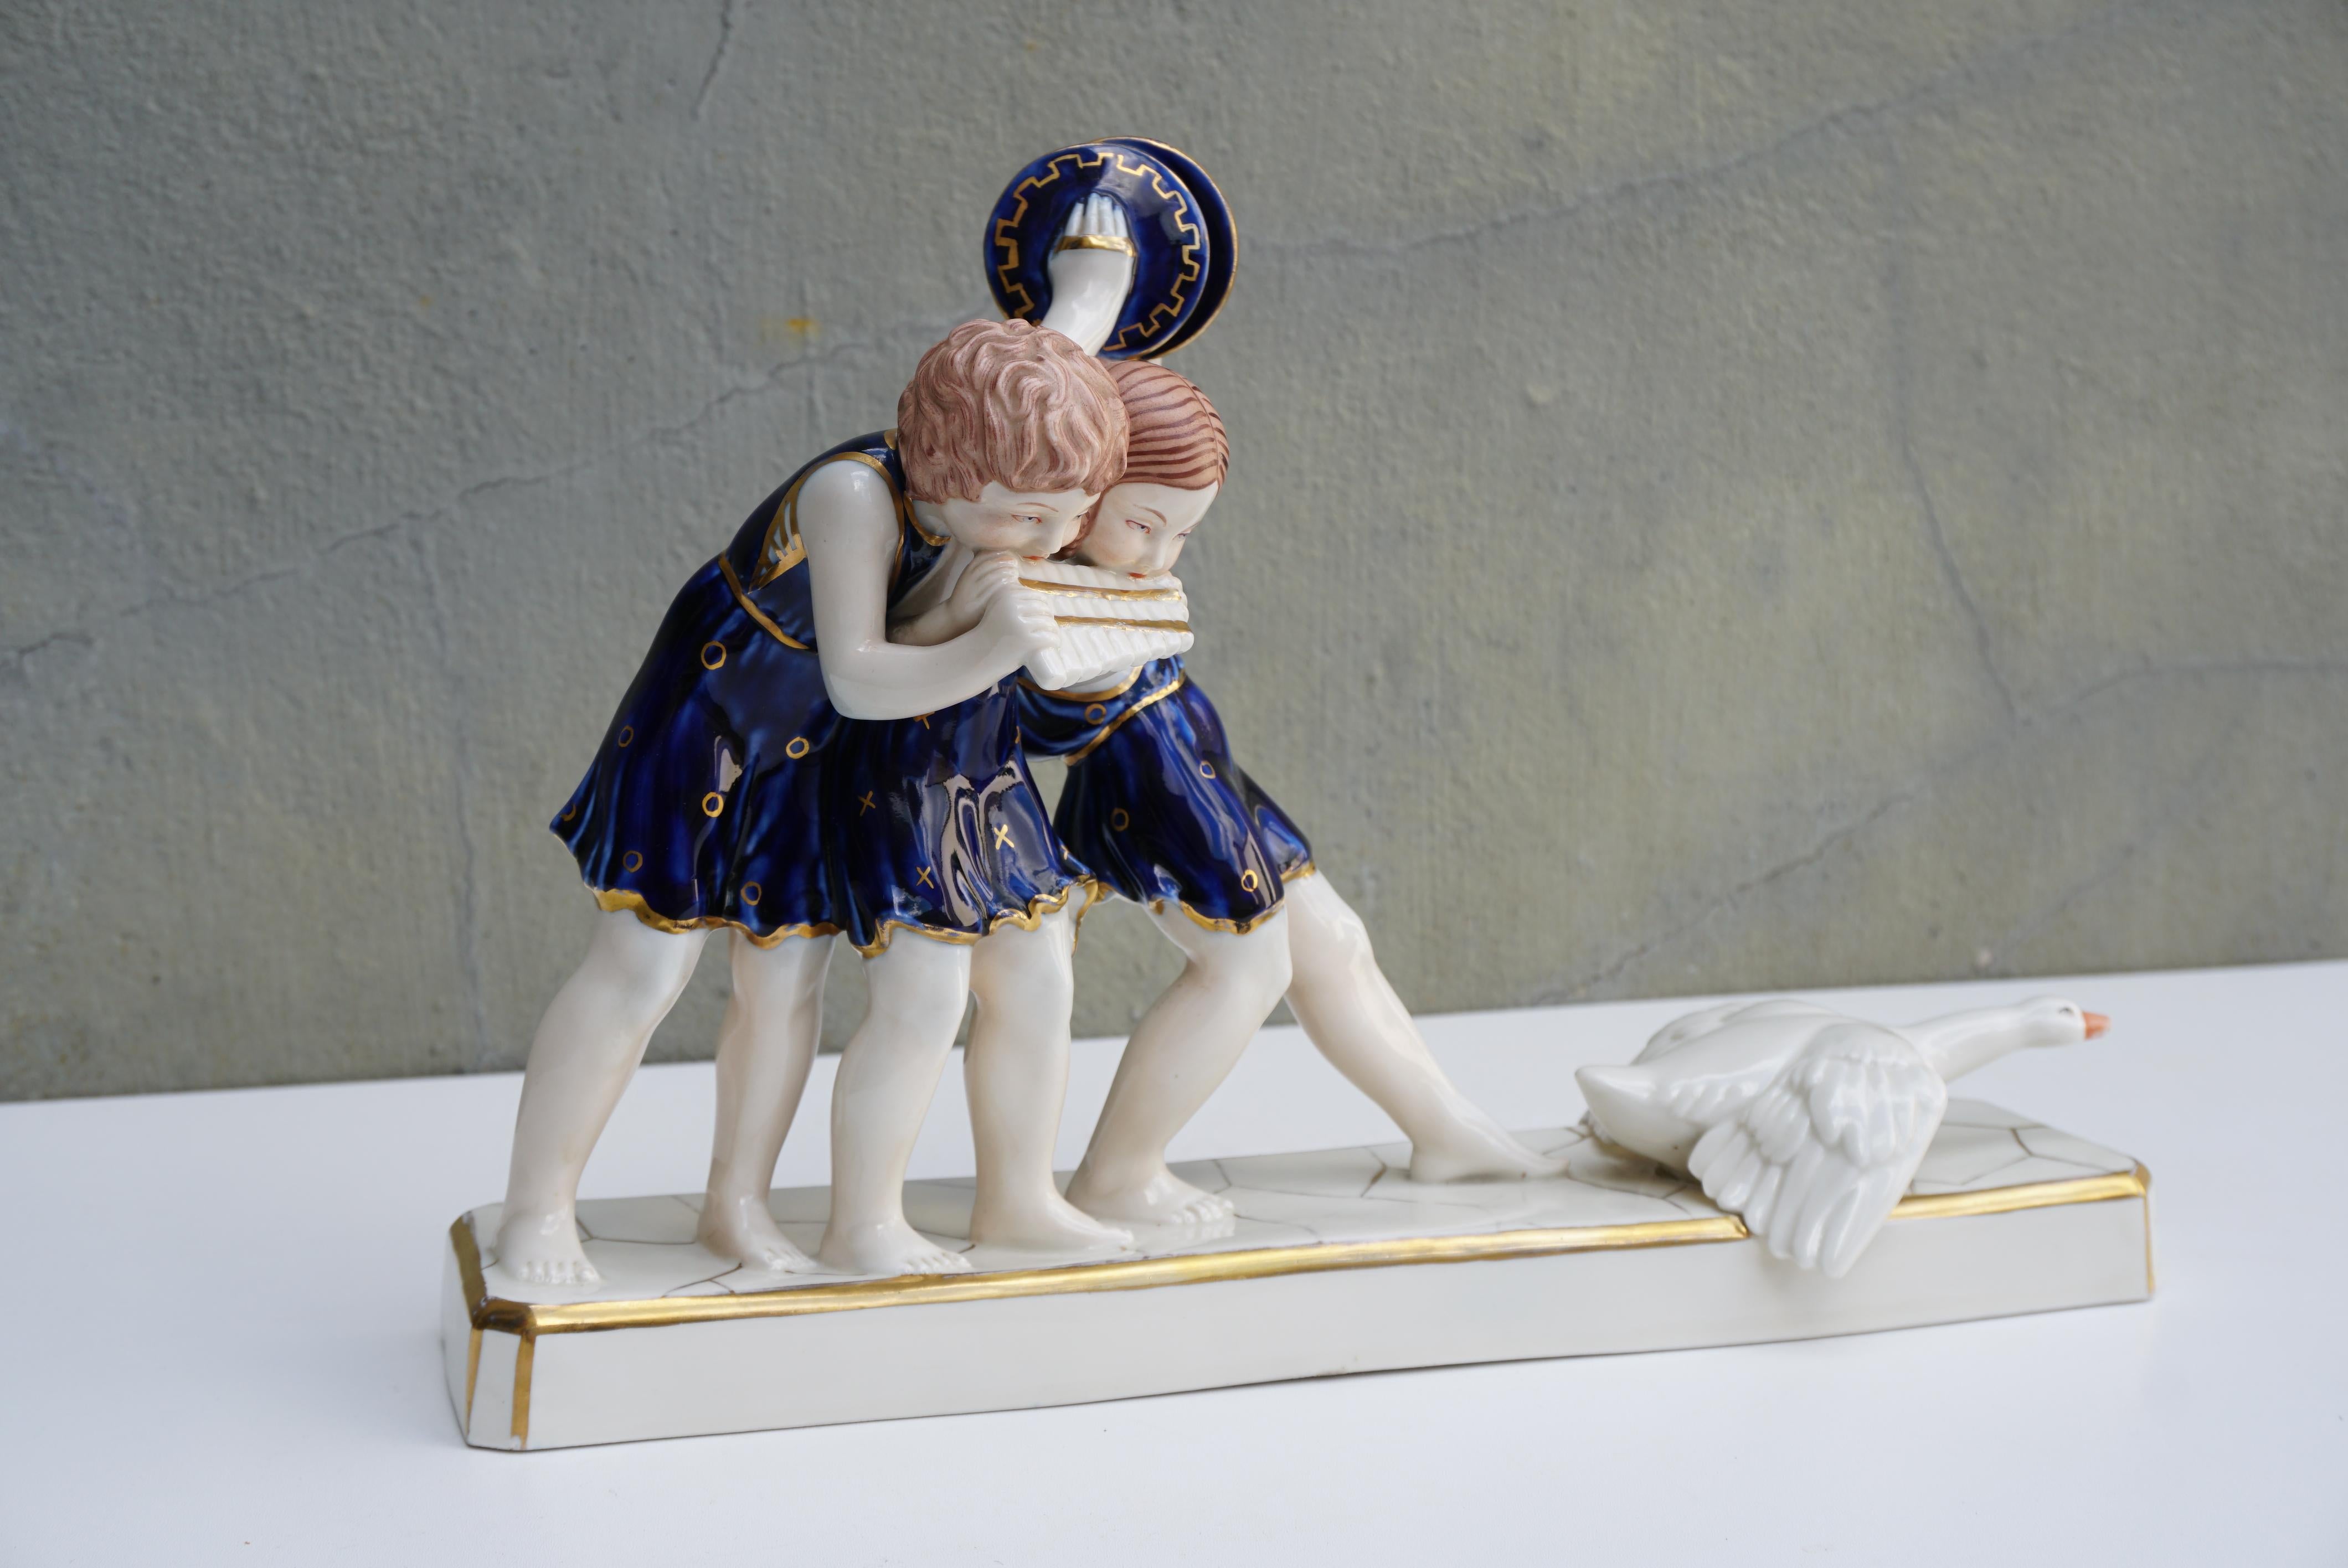 Art Deco Royal Dux hand painted porcelain figurine. Czech Republic, 1940s.

Three children making music.
Czech Royal Dux polychrome enameled porcelain, cobalt blue costume, gold accents, brand and pastille under the base.

Height 10.2